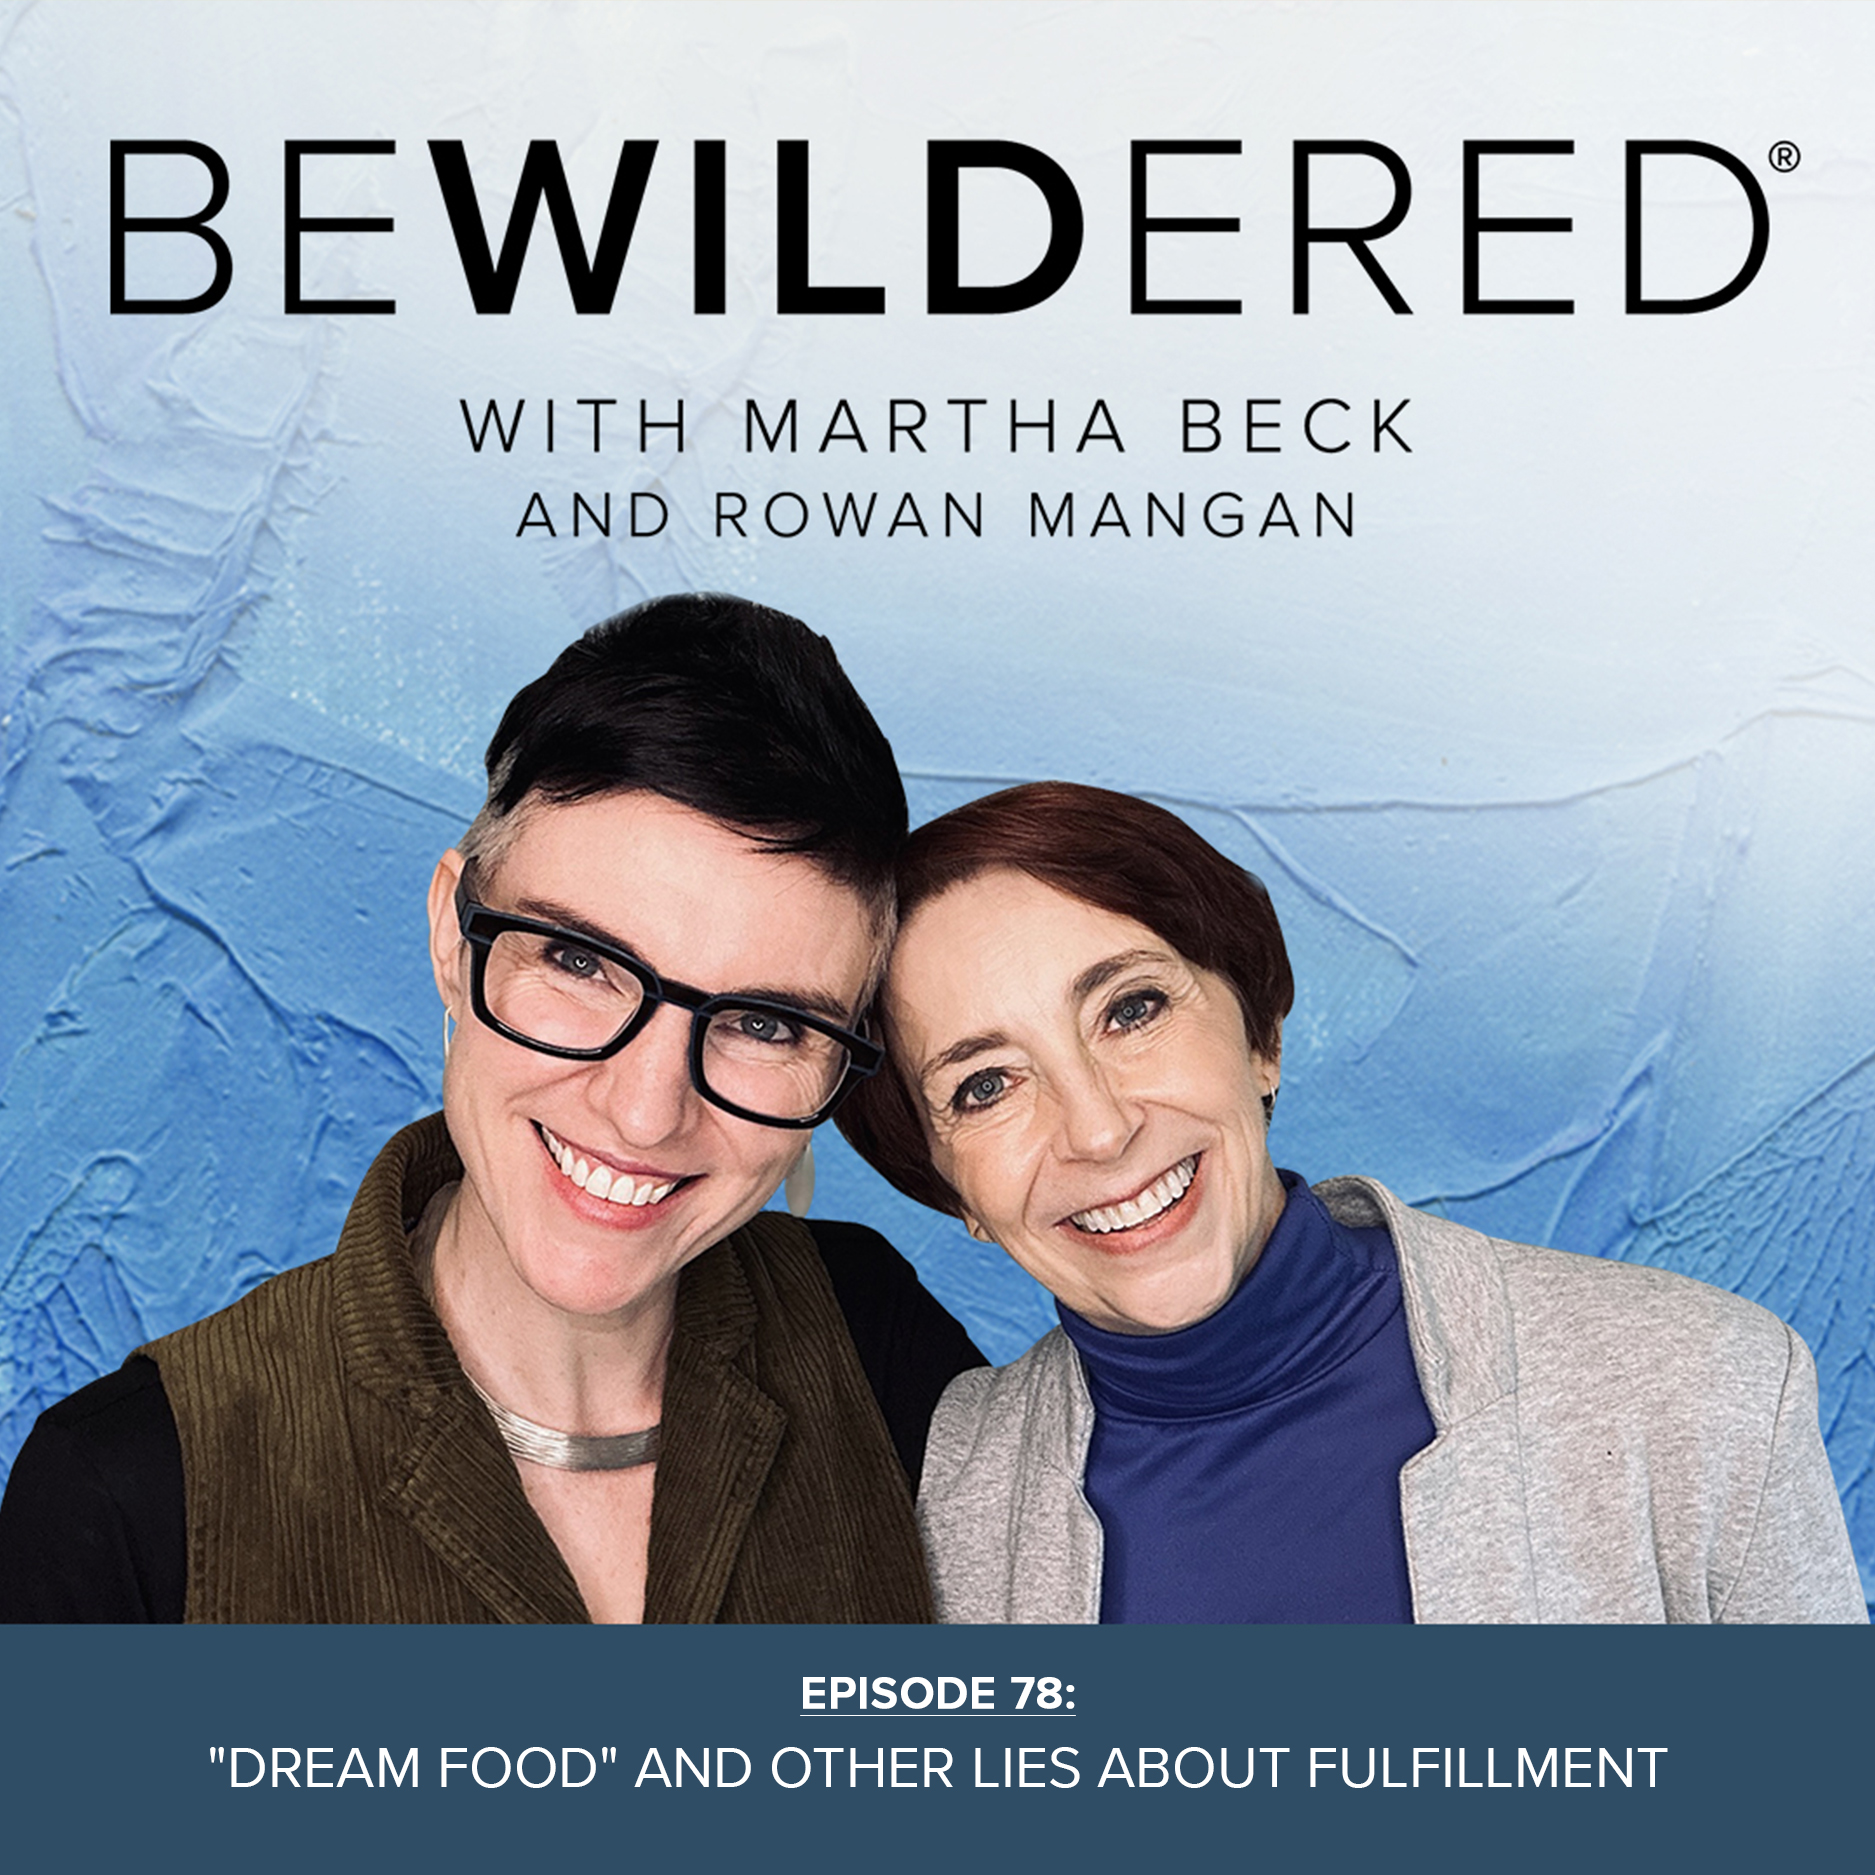 Image for Episode #78 “Dream Food” And Other Lies About Fulfillment for the Bewildered Podcast with Martha Beck and Rowan Mangan